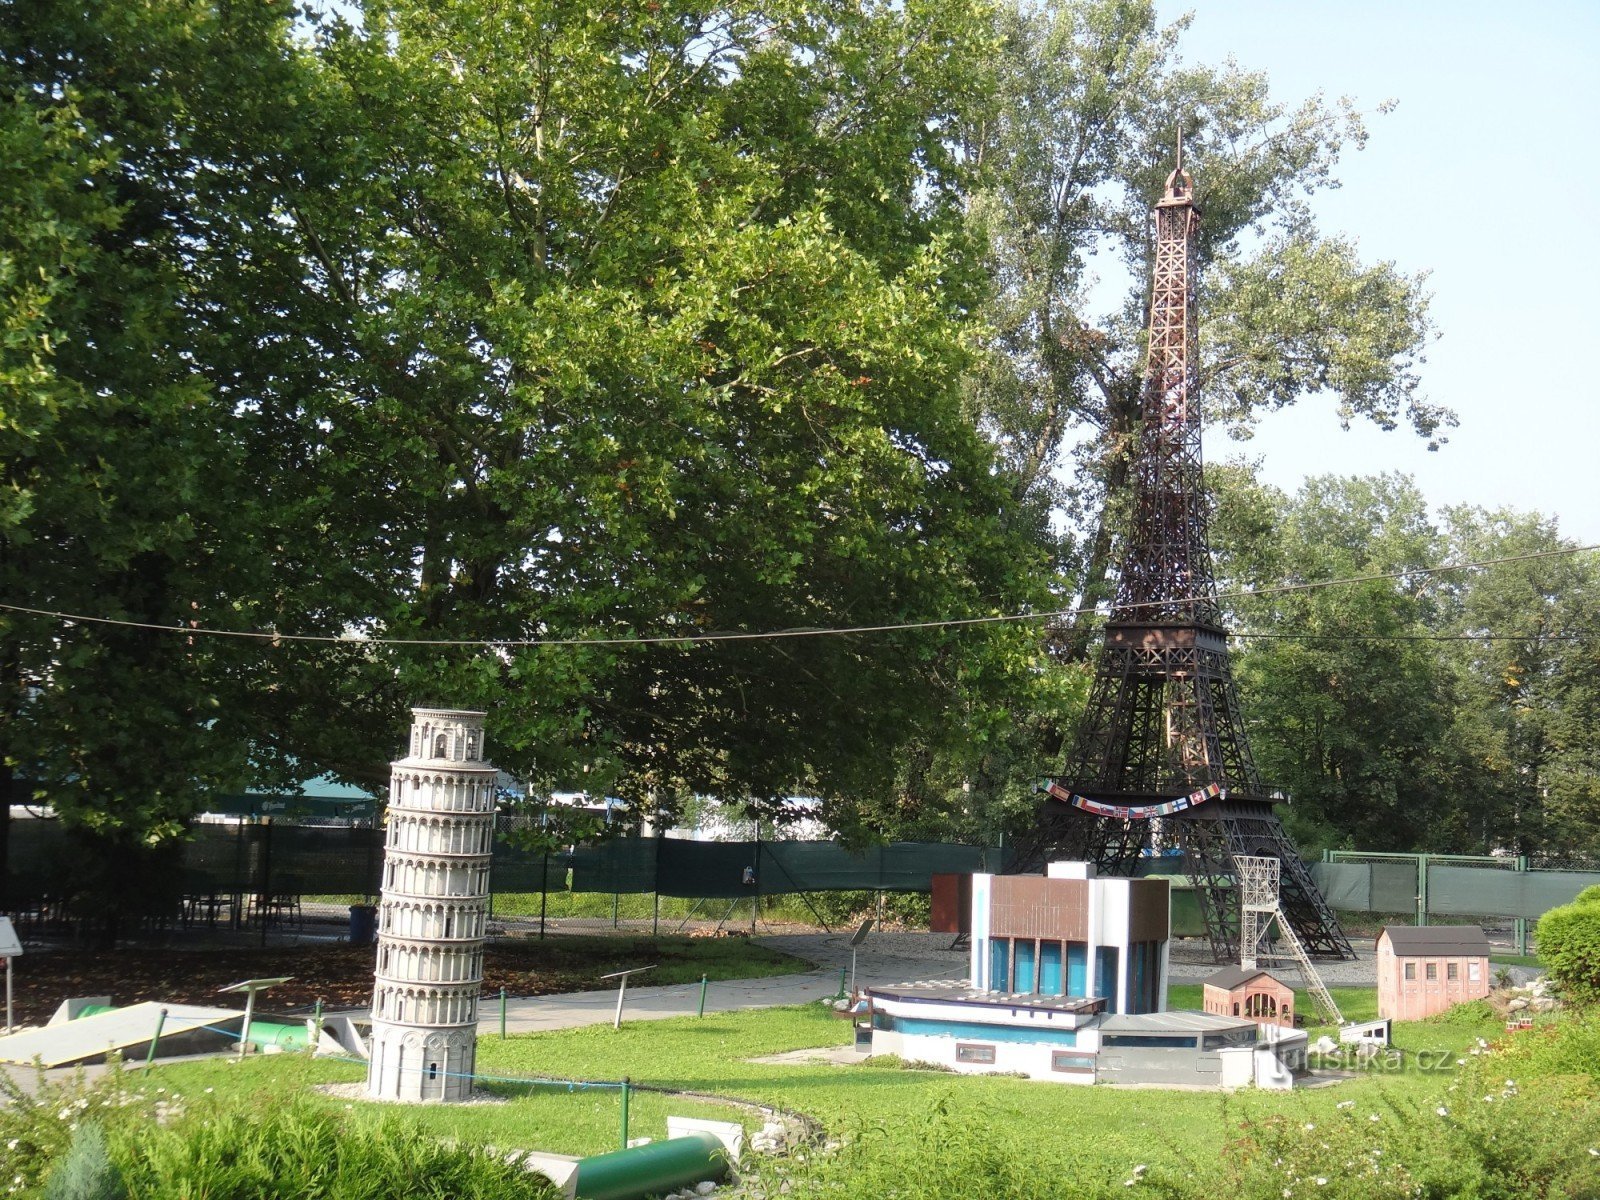 the mini Eiffel Tower and the Leaning Tower of Pisa and the Landek Mining Museum